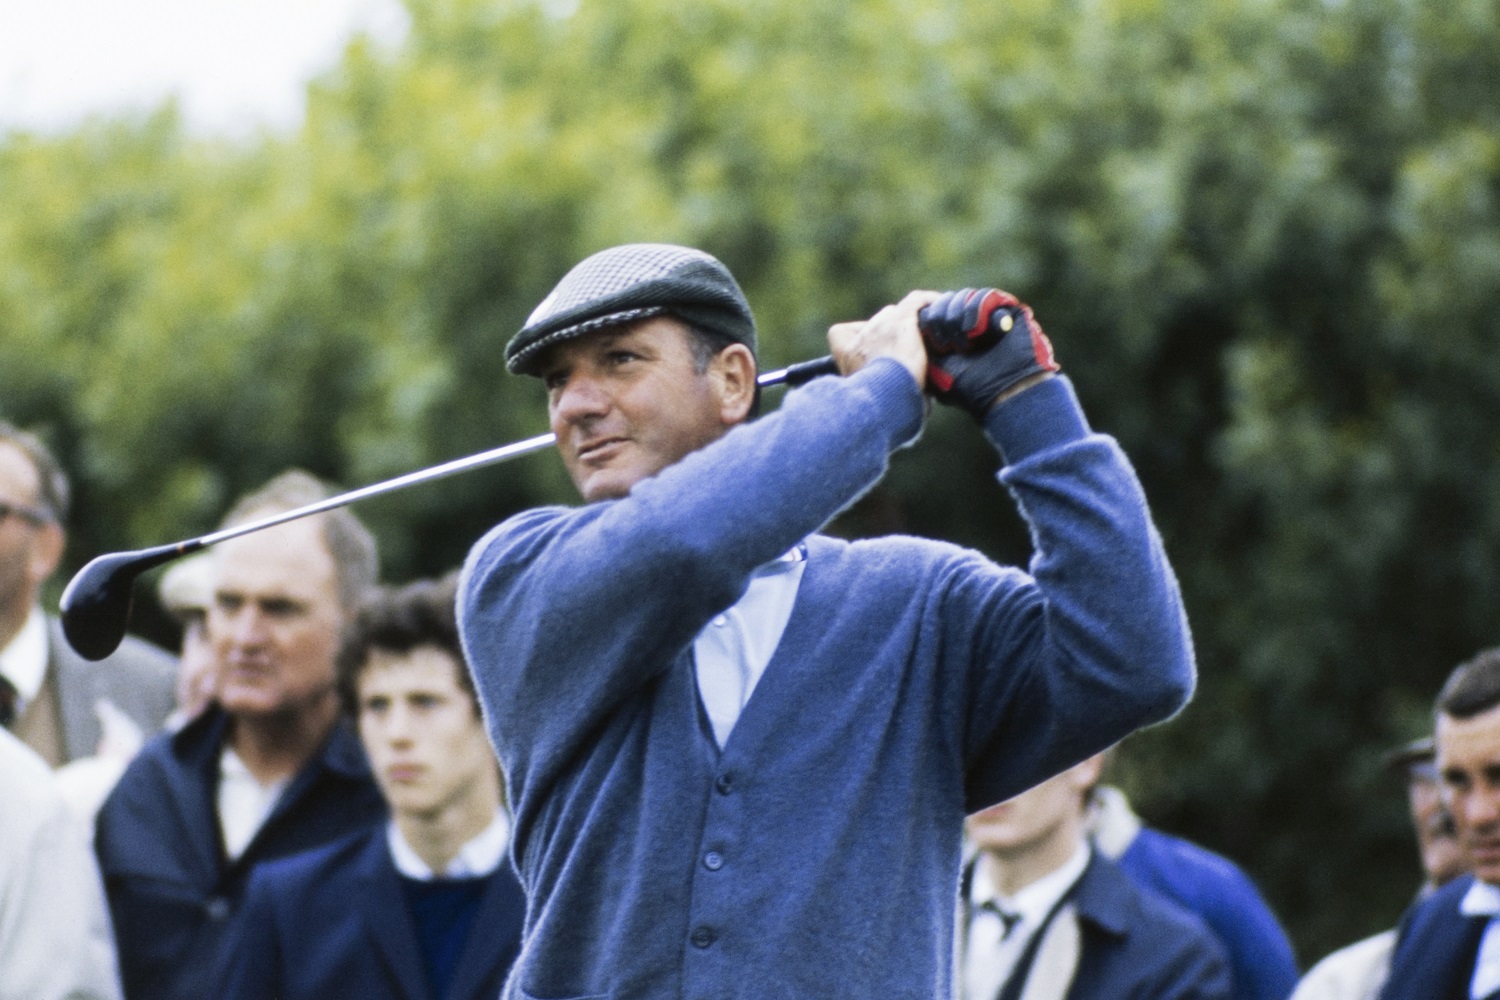 Robert De Vicenzo, the runner-up at The Masters in 1968, won more than 200 pro golf tournaments around the world.